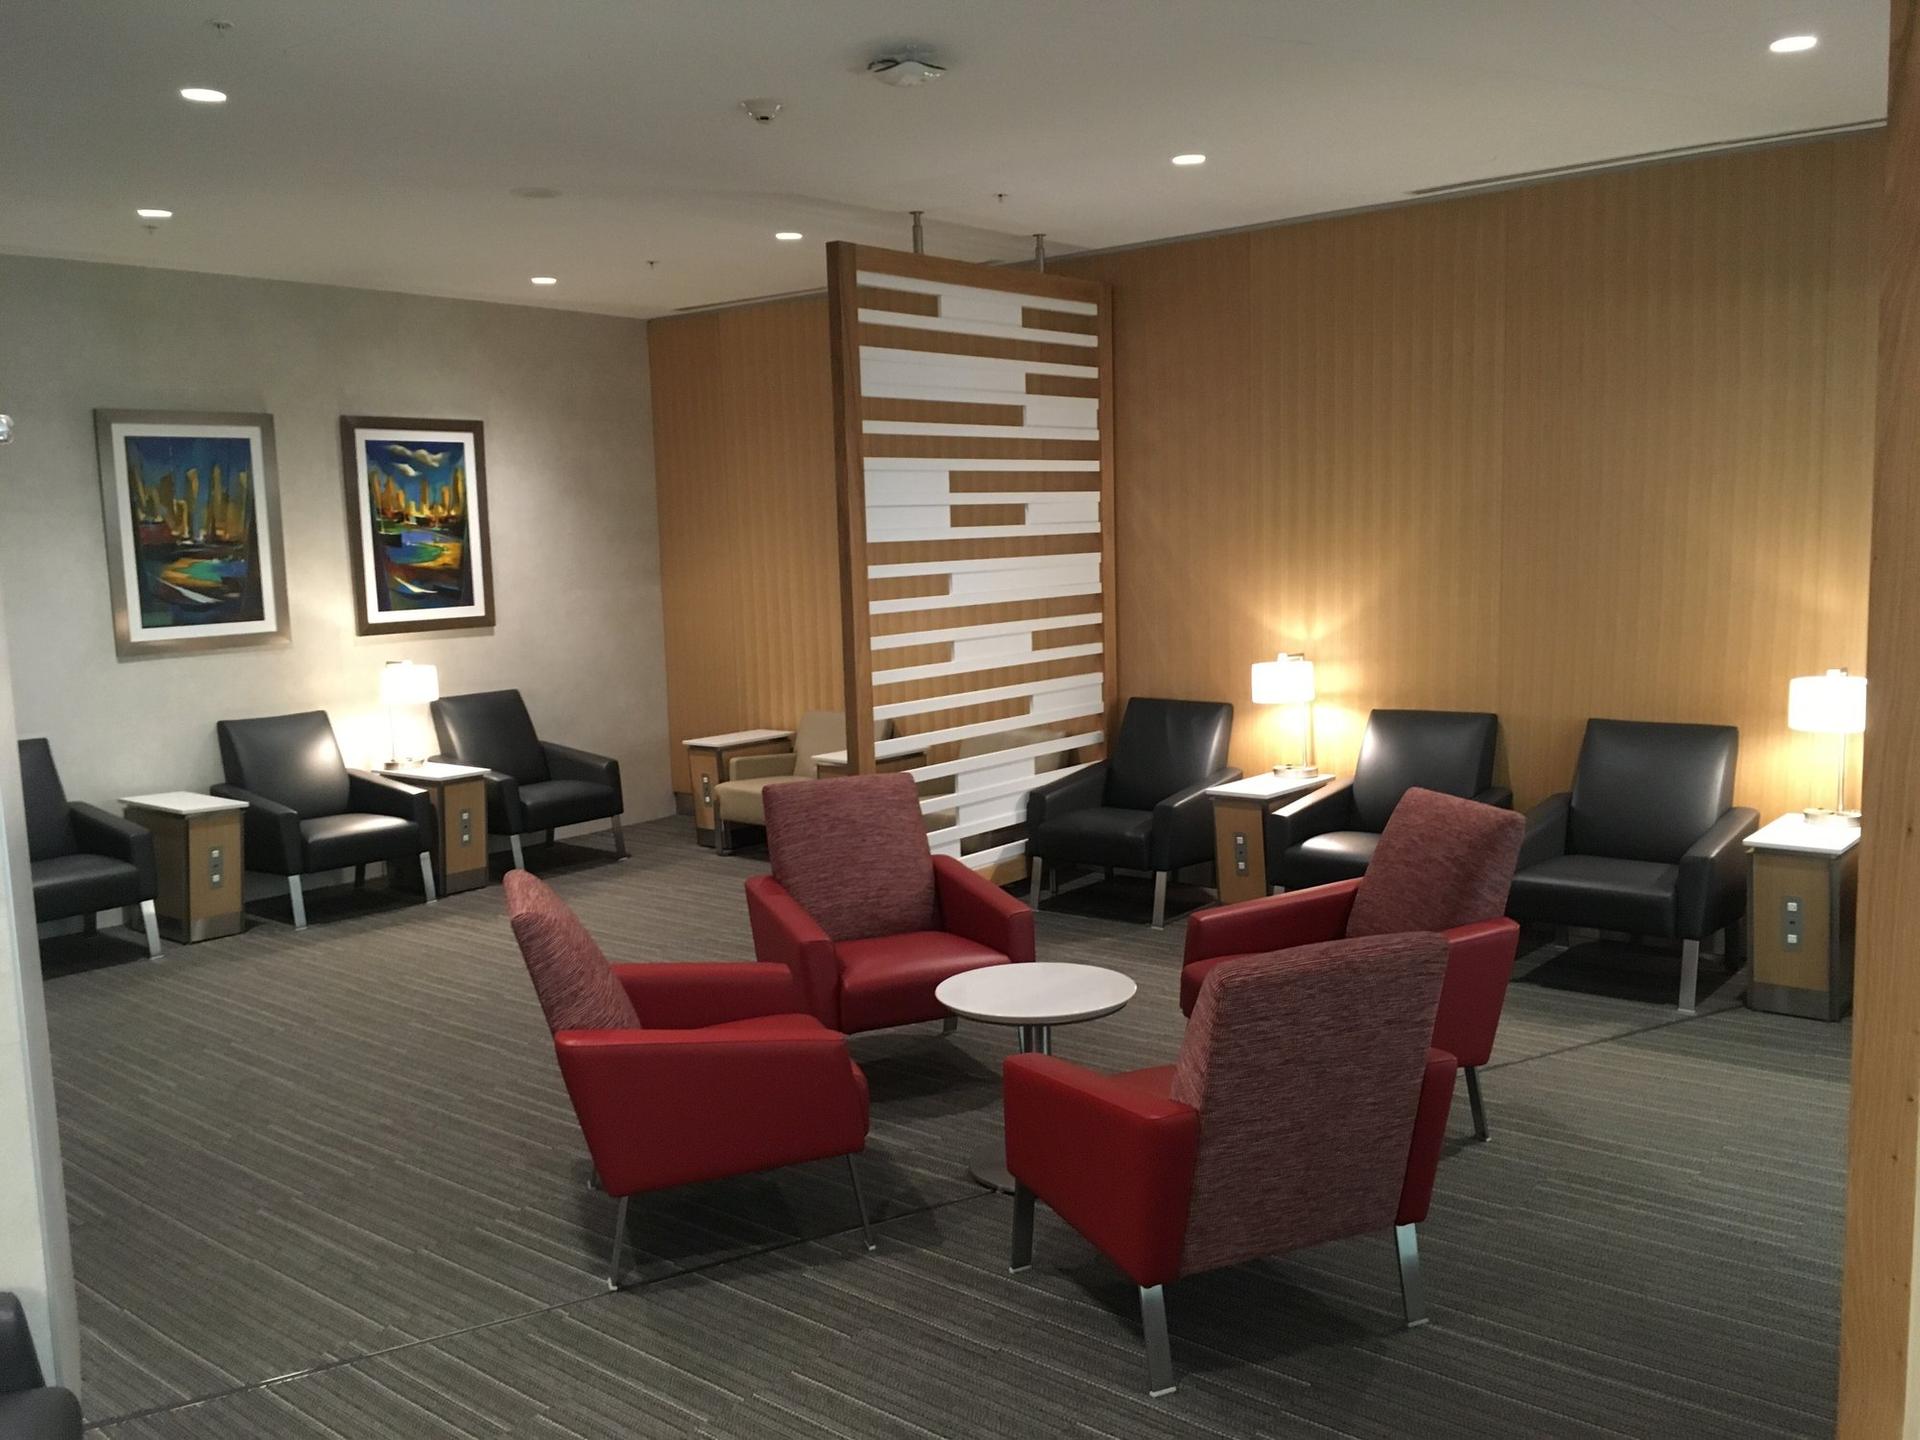 American Airlines Flagship Lounge image 45 of 65